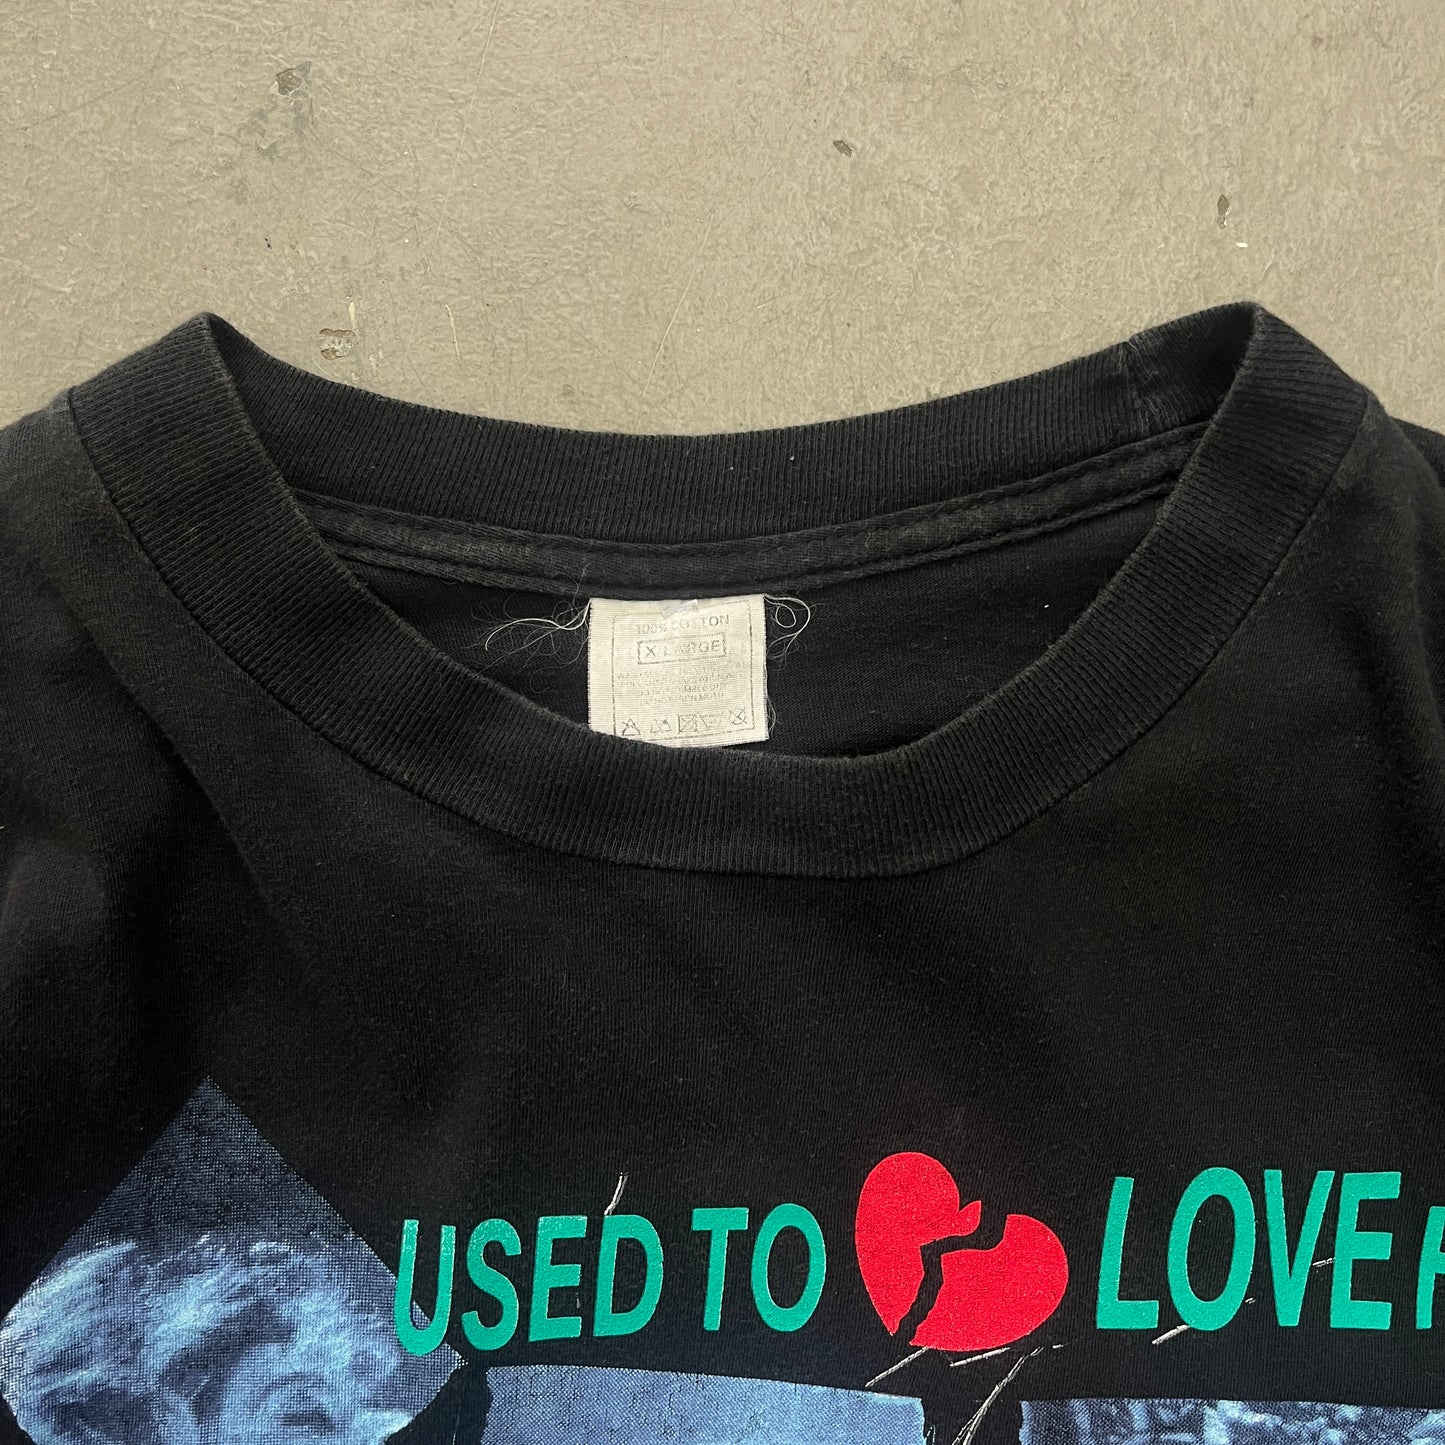 GUNS N ROSES USED TO LOVE HER BUT... 1989 [XL]